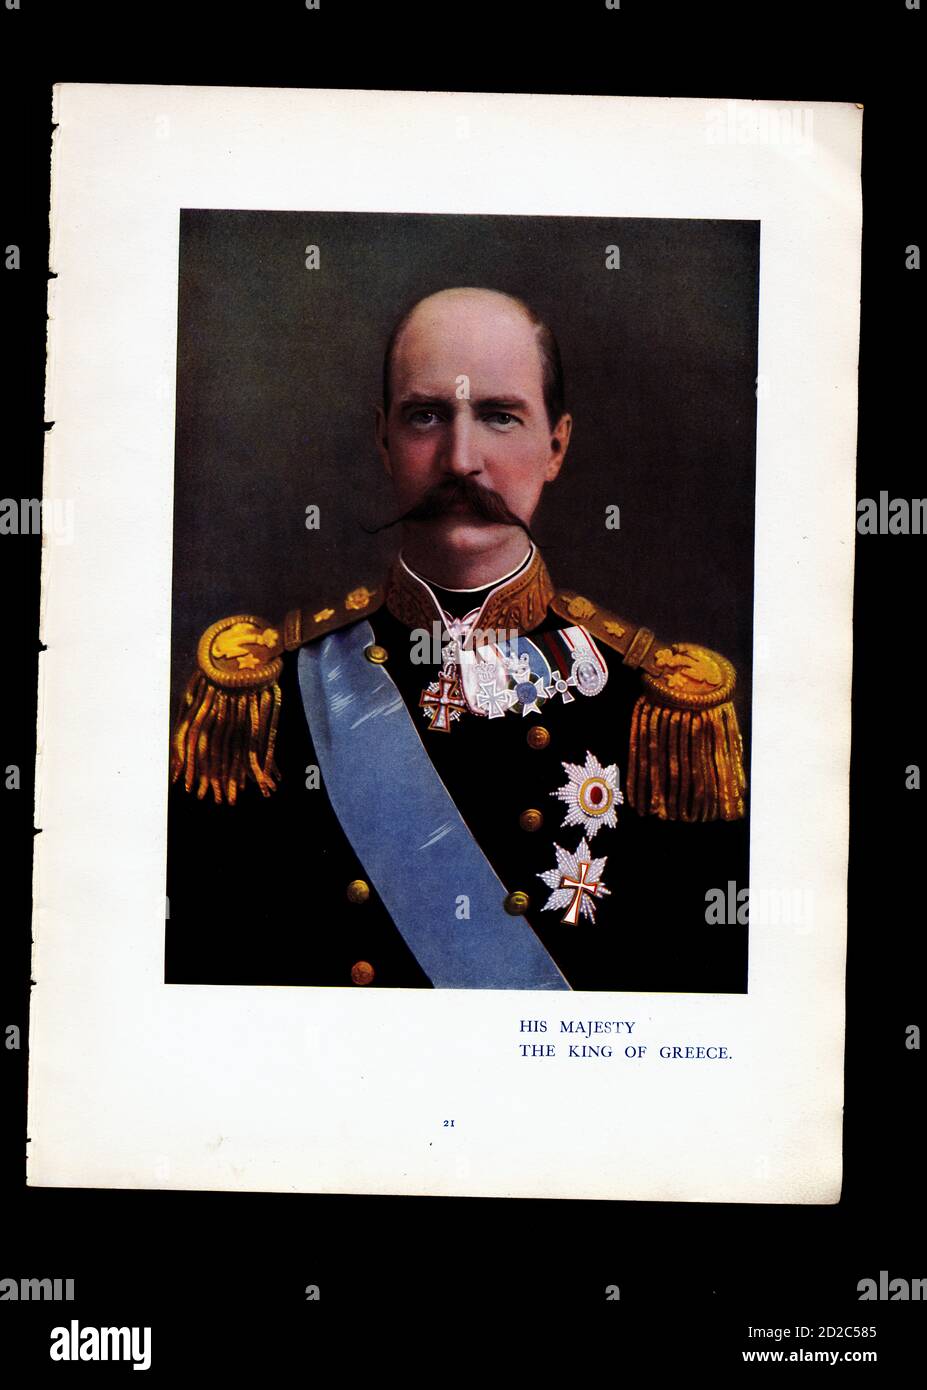 Chromolithographic portrait of George I, King of Greece (24 December 1845 – 18 March 1913). During his reign of almost 50 years Greece established its Stock Photo